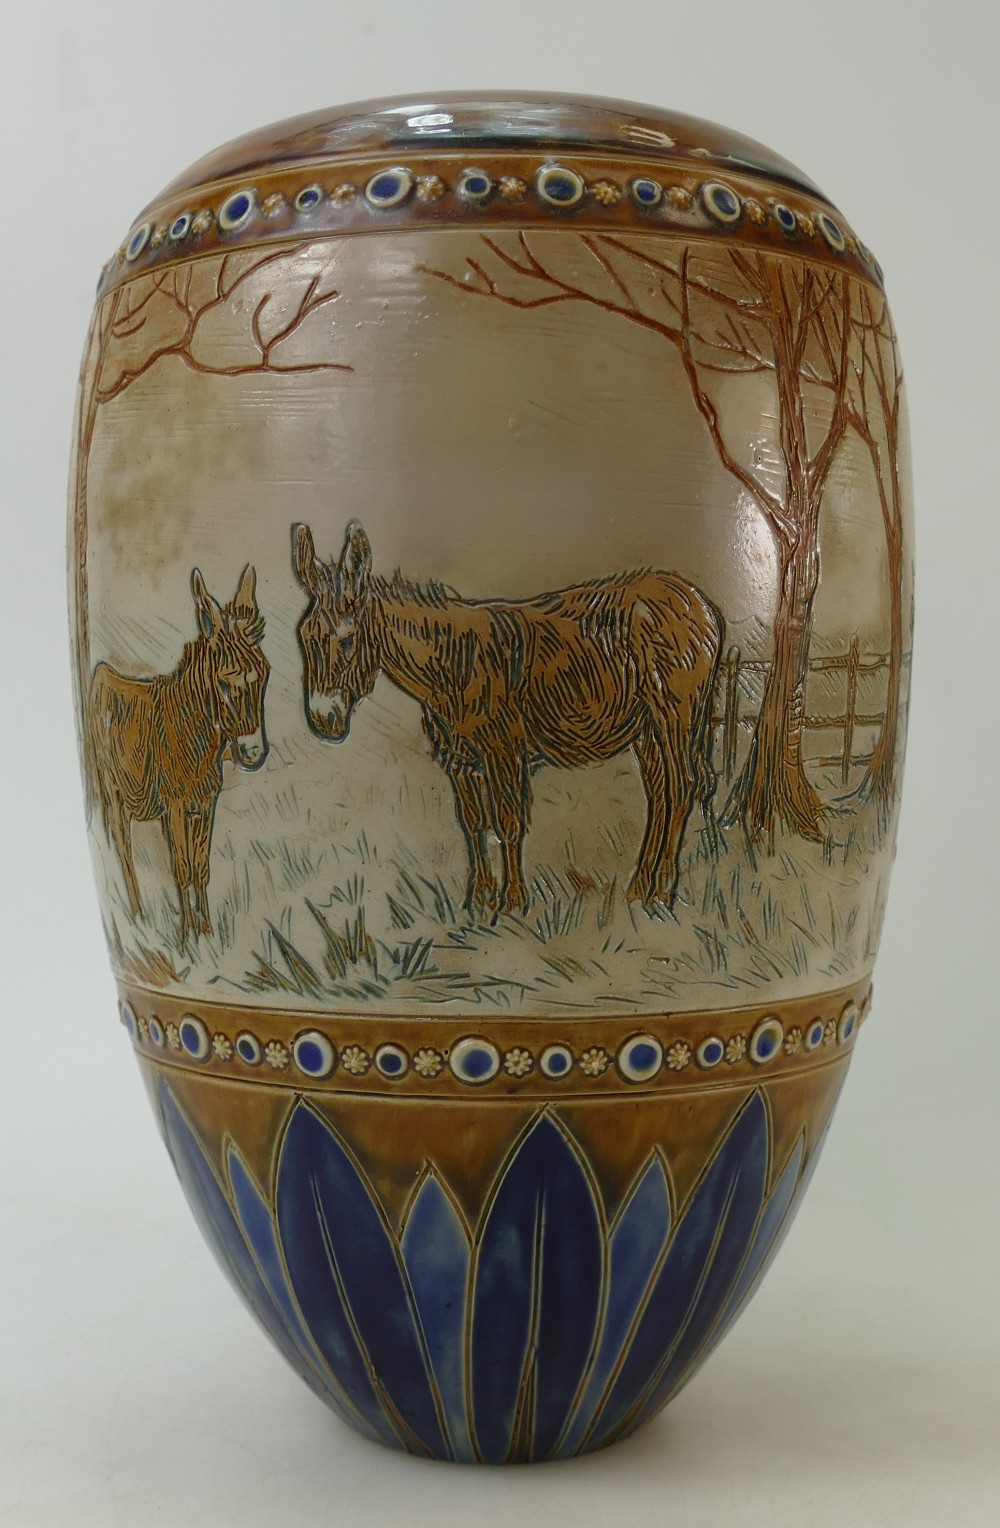 Royal Doulton Hannah Barlow vase: Vase by Royal Dolton decorated all around with cattle and donkeys - Image 5 of 5